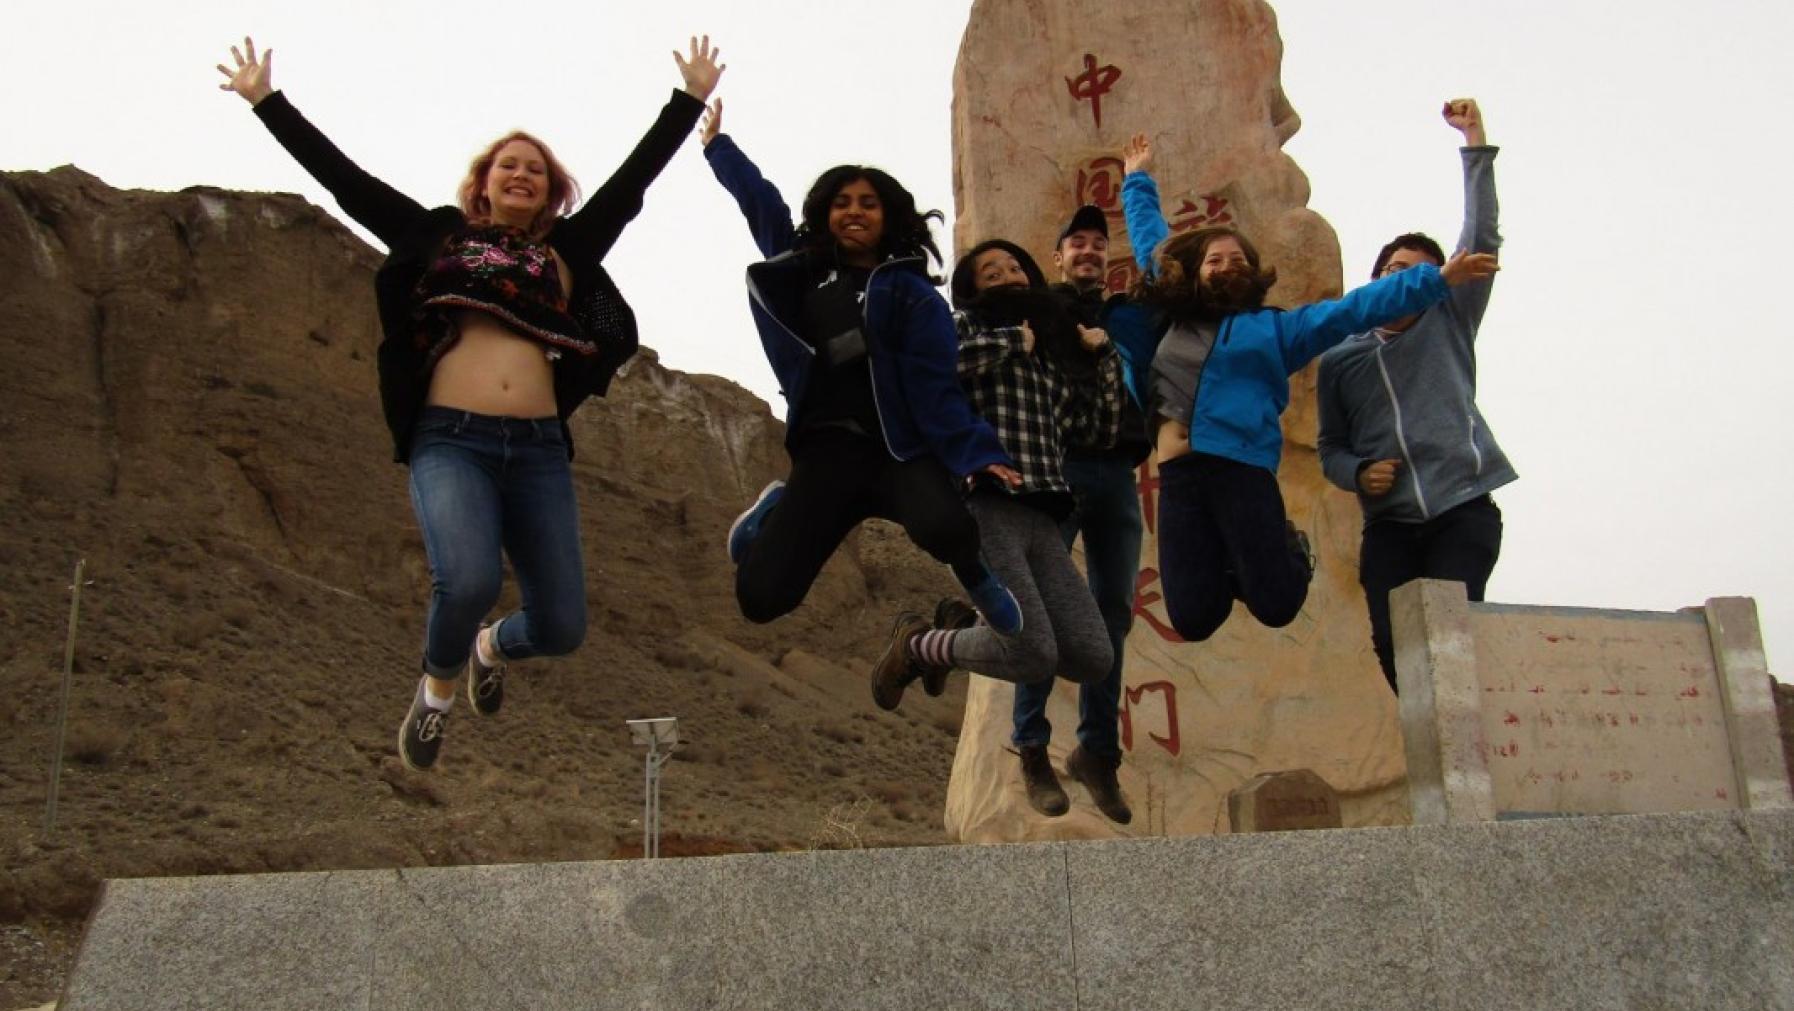 Some people jumping in front of a monument.